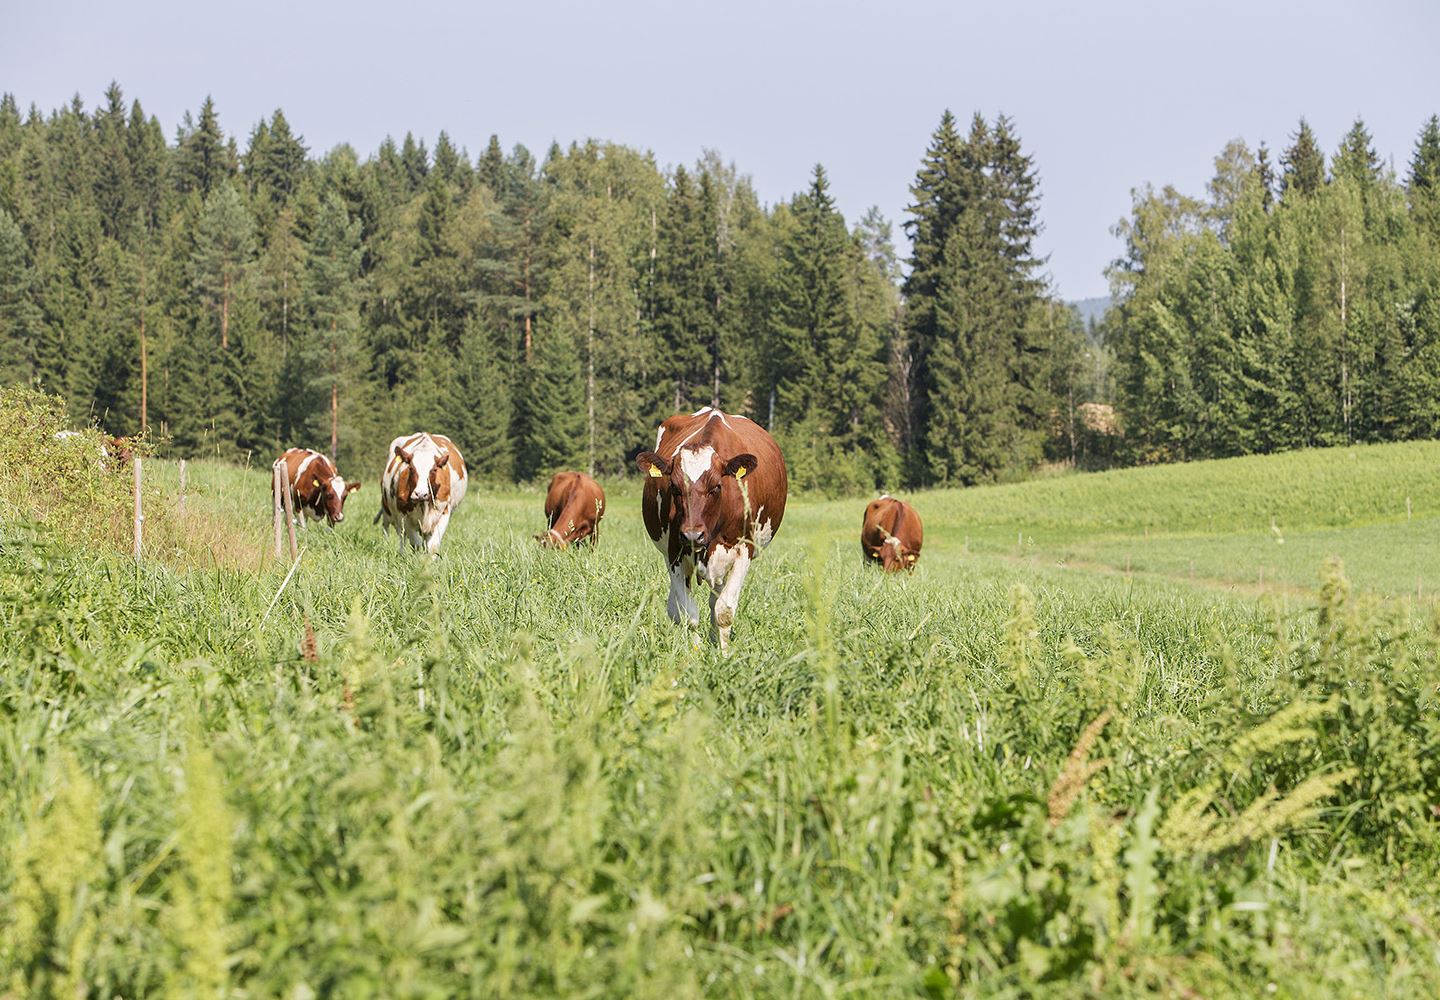 Good Bad Methane - Does Finnish Cattle Farming Harm the Climate?